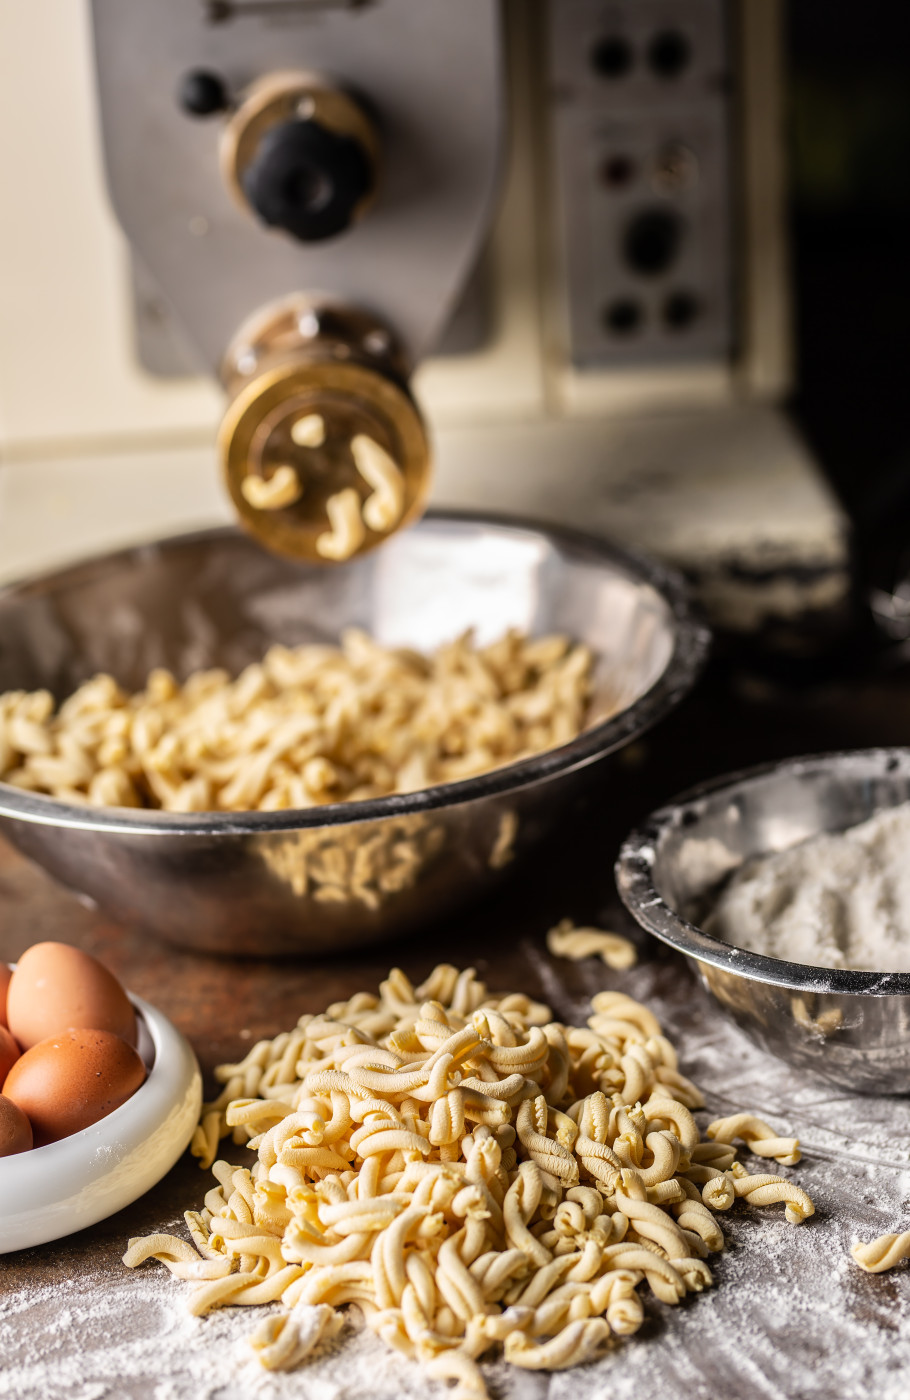 Handmade Pasta with flour and eggs